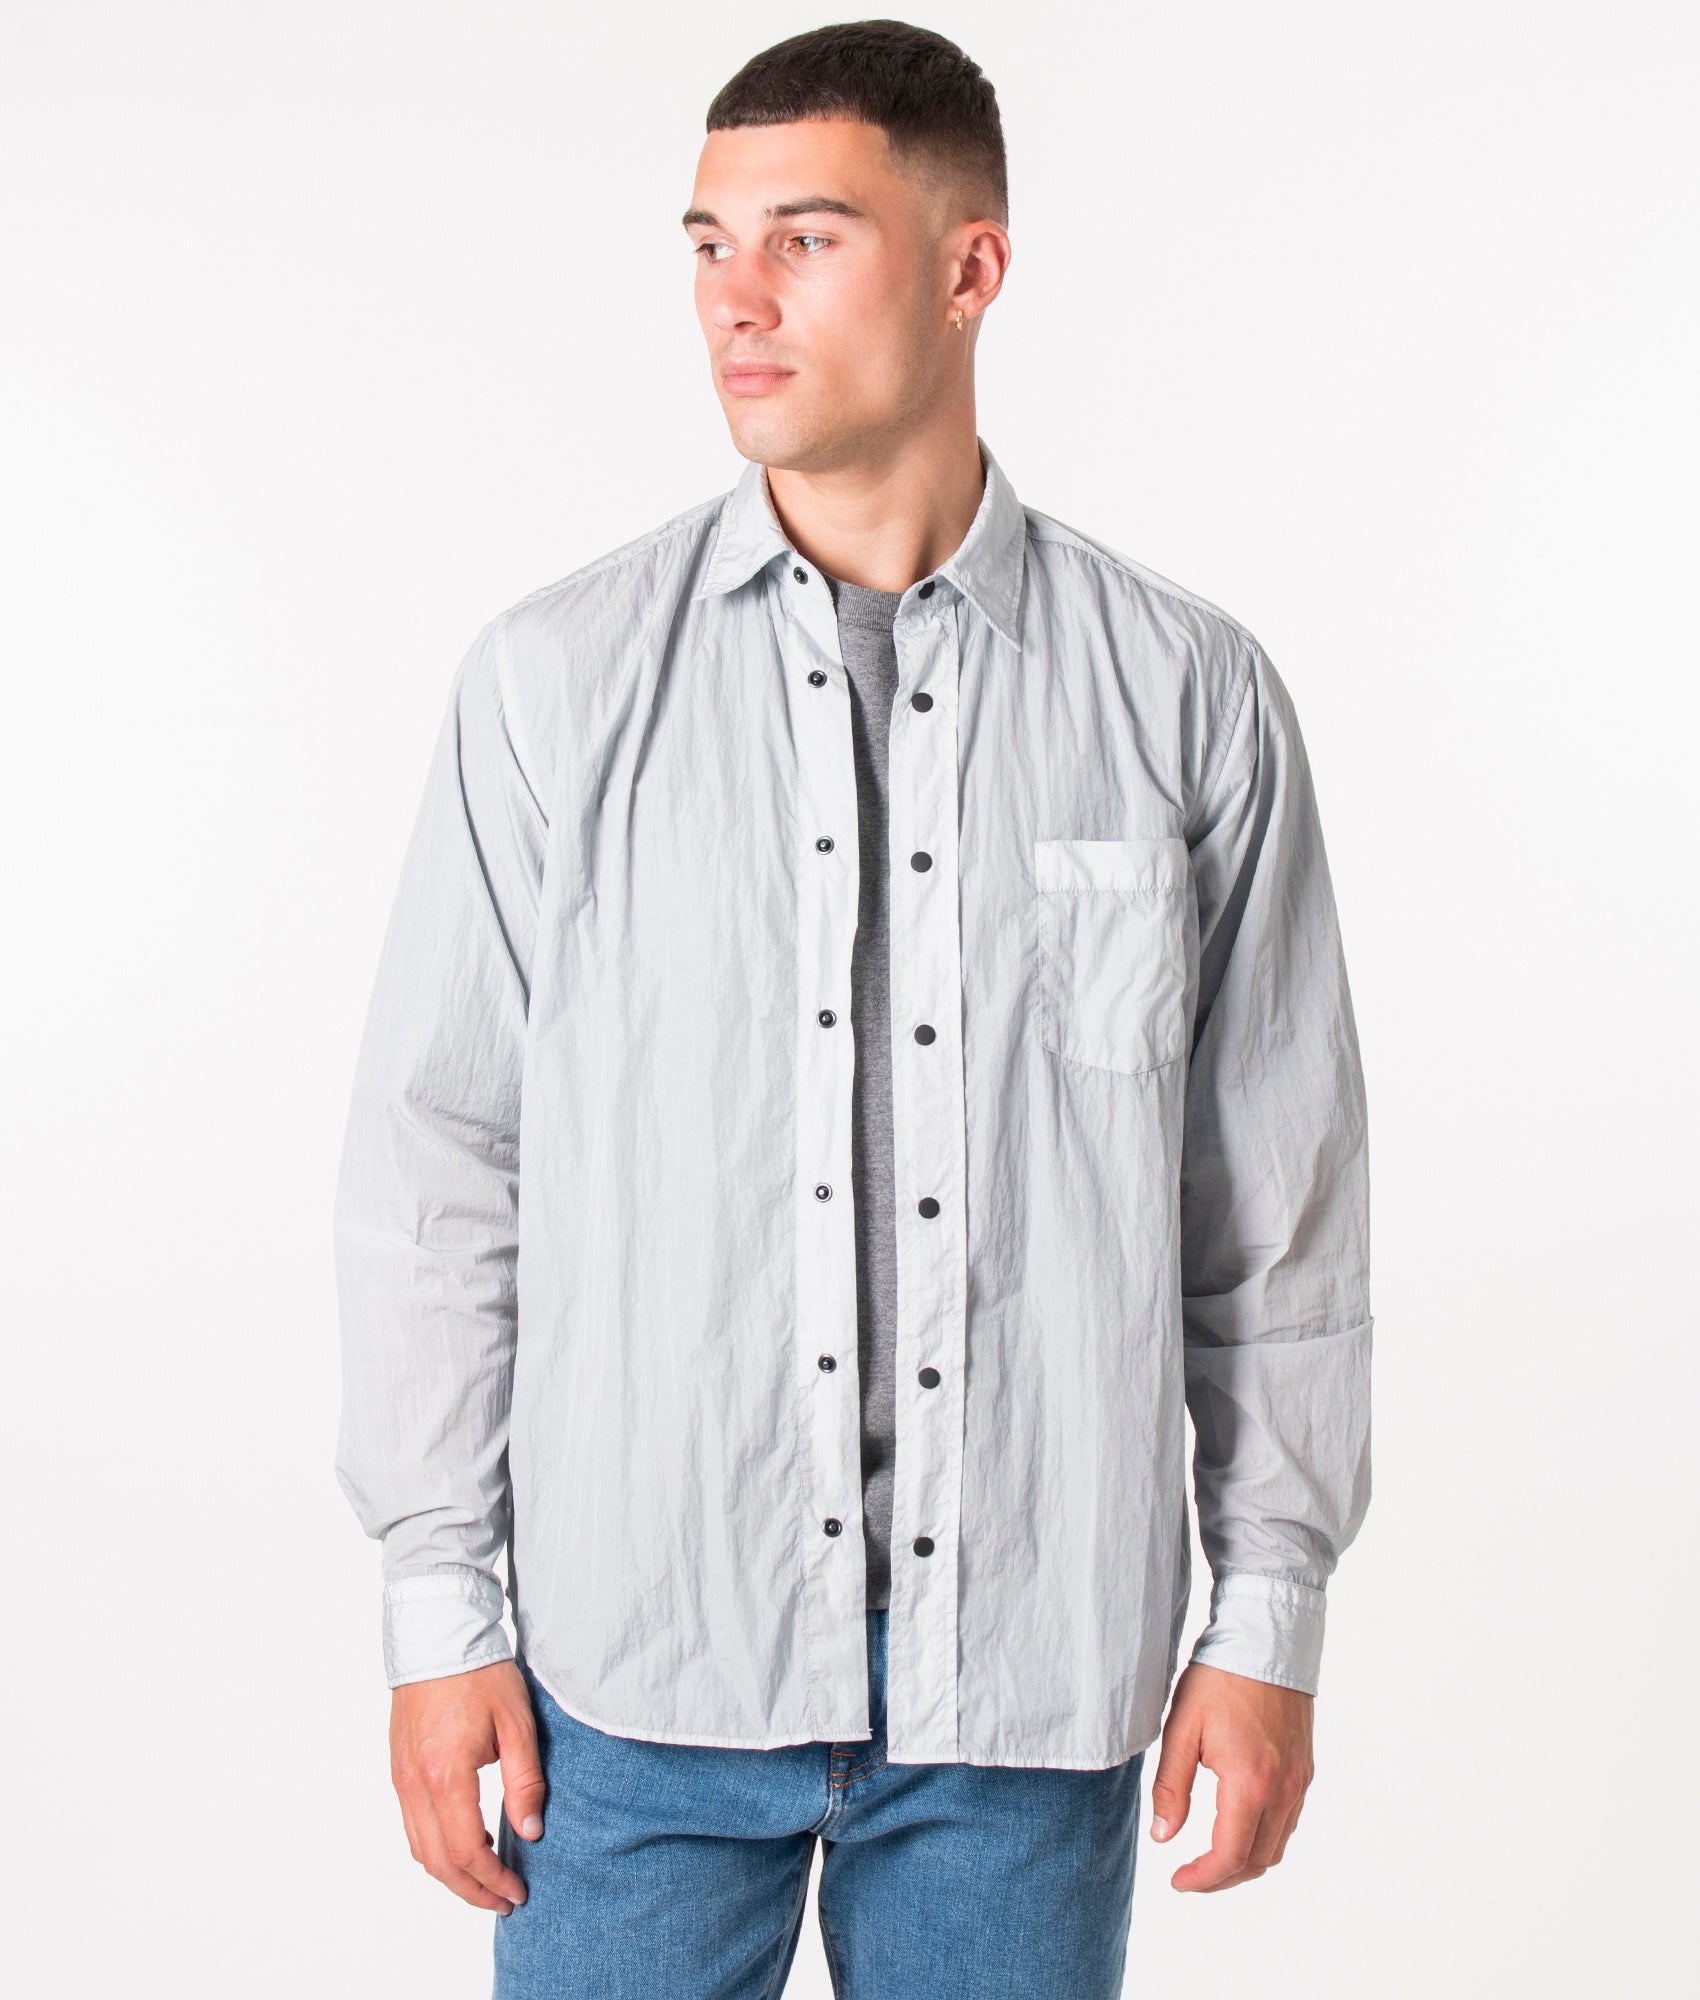 BOSS Mens Relaxed Fit Lambini Shirt - Colour: 050 Light/Pastel Grey - Size: Large